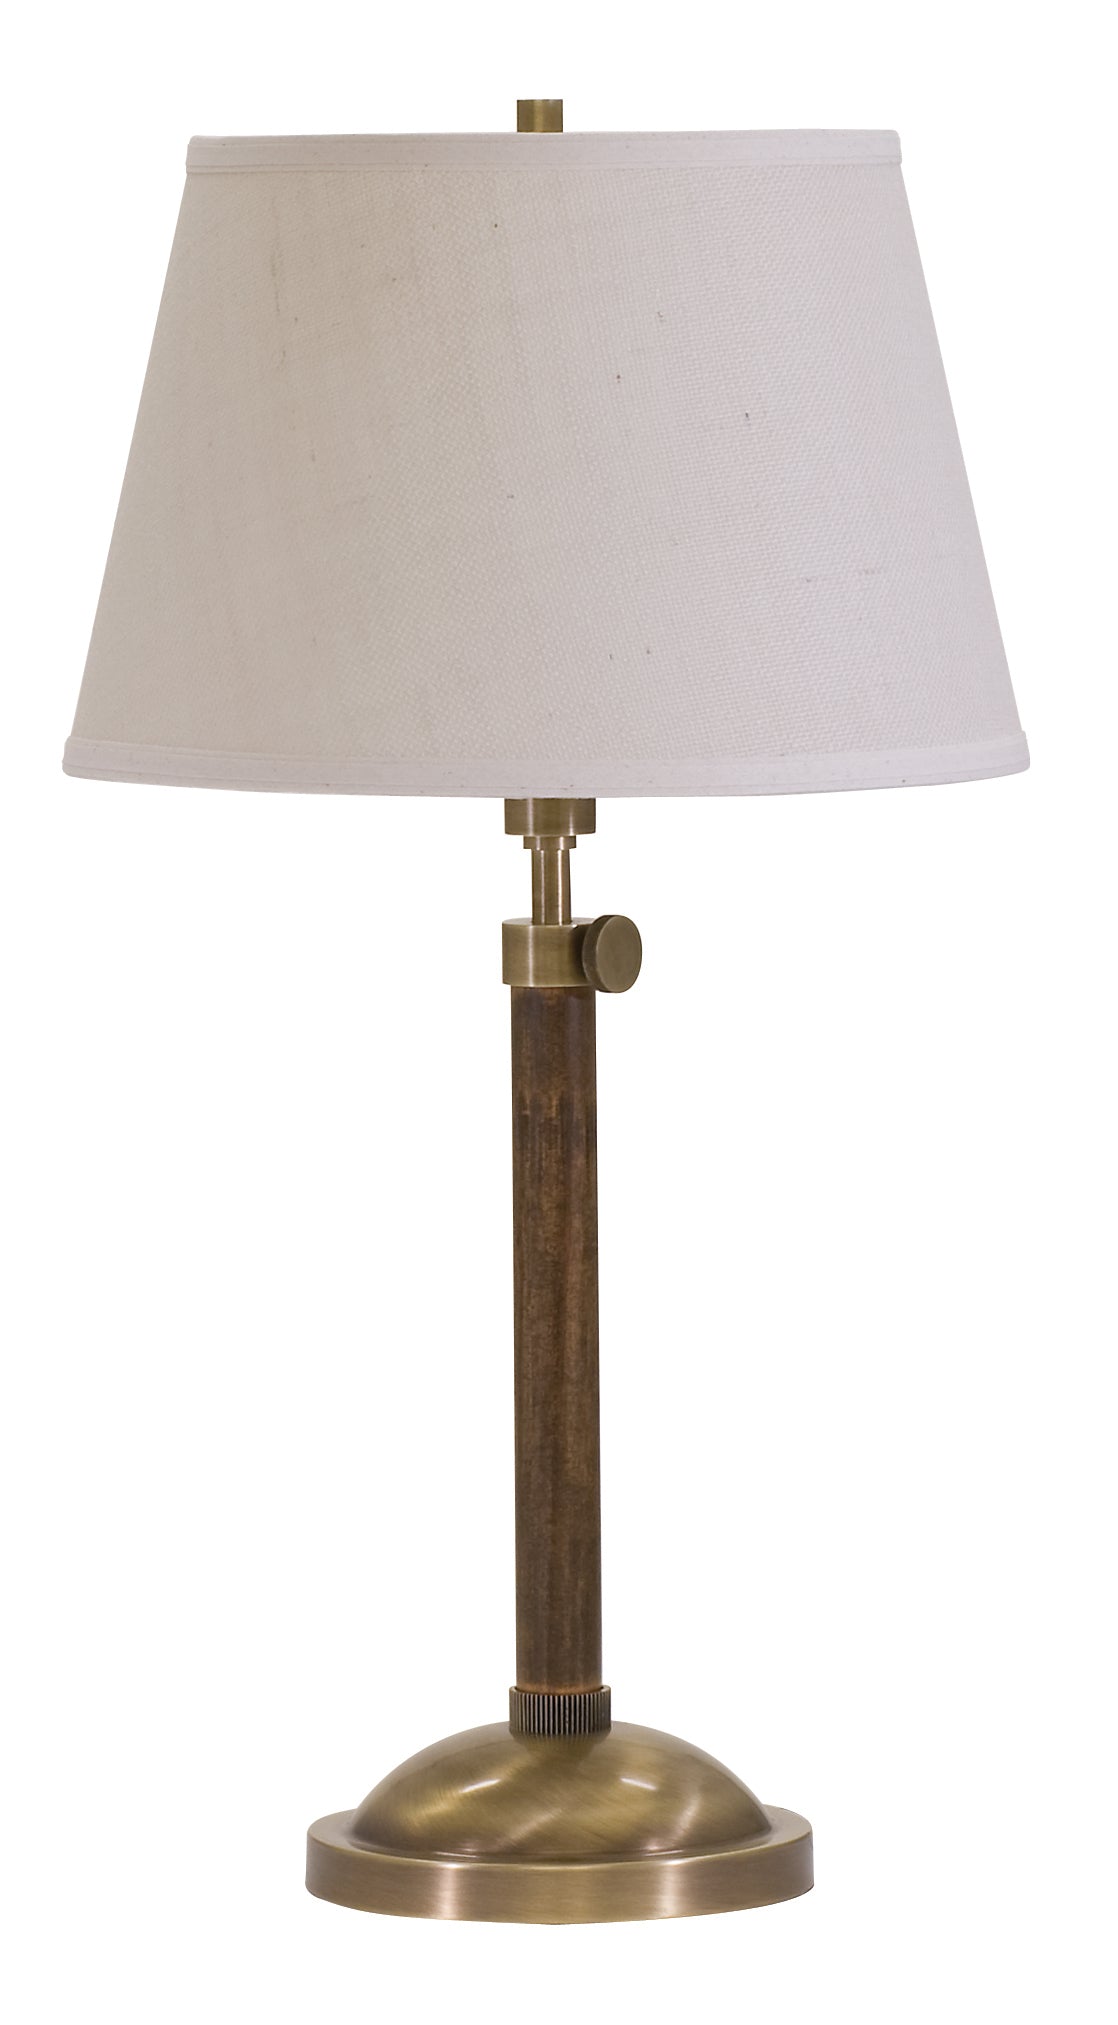 House of Troy Richmond Adjustable Antique Brass Table Lamp R450-AB